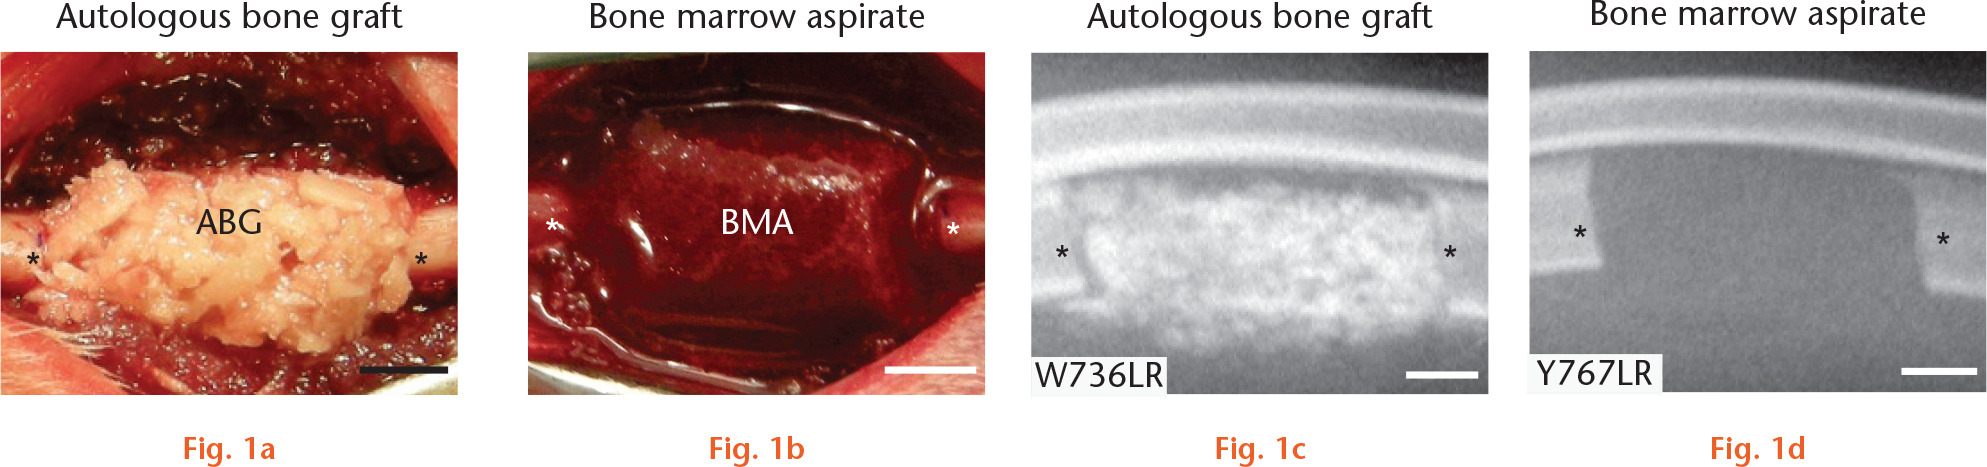 Fig. 1 
            Implantation of autologous bone graft (ABG) and bone marrow aspirate (BMA) treatments into ulnar defects. Representative a) and b) post-implantation digital images, and c) and d) post-surgical radiographs of ABG and BMA treatments in rabbit ulnar defects. Scale bar indicates 3.5 mm. *Osteotomized bone end.
          